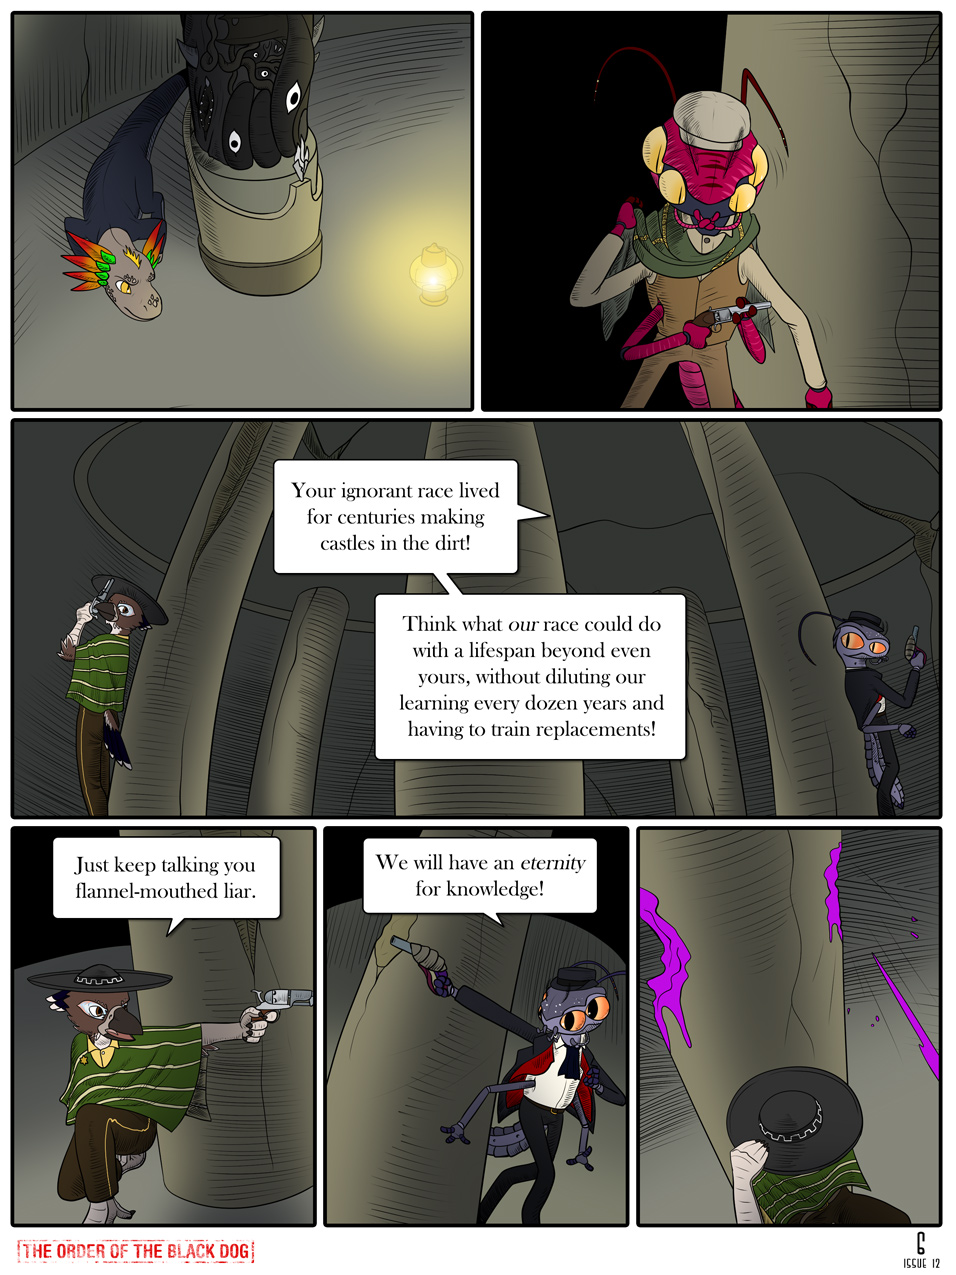 Issue 12, Page 6